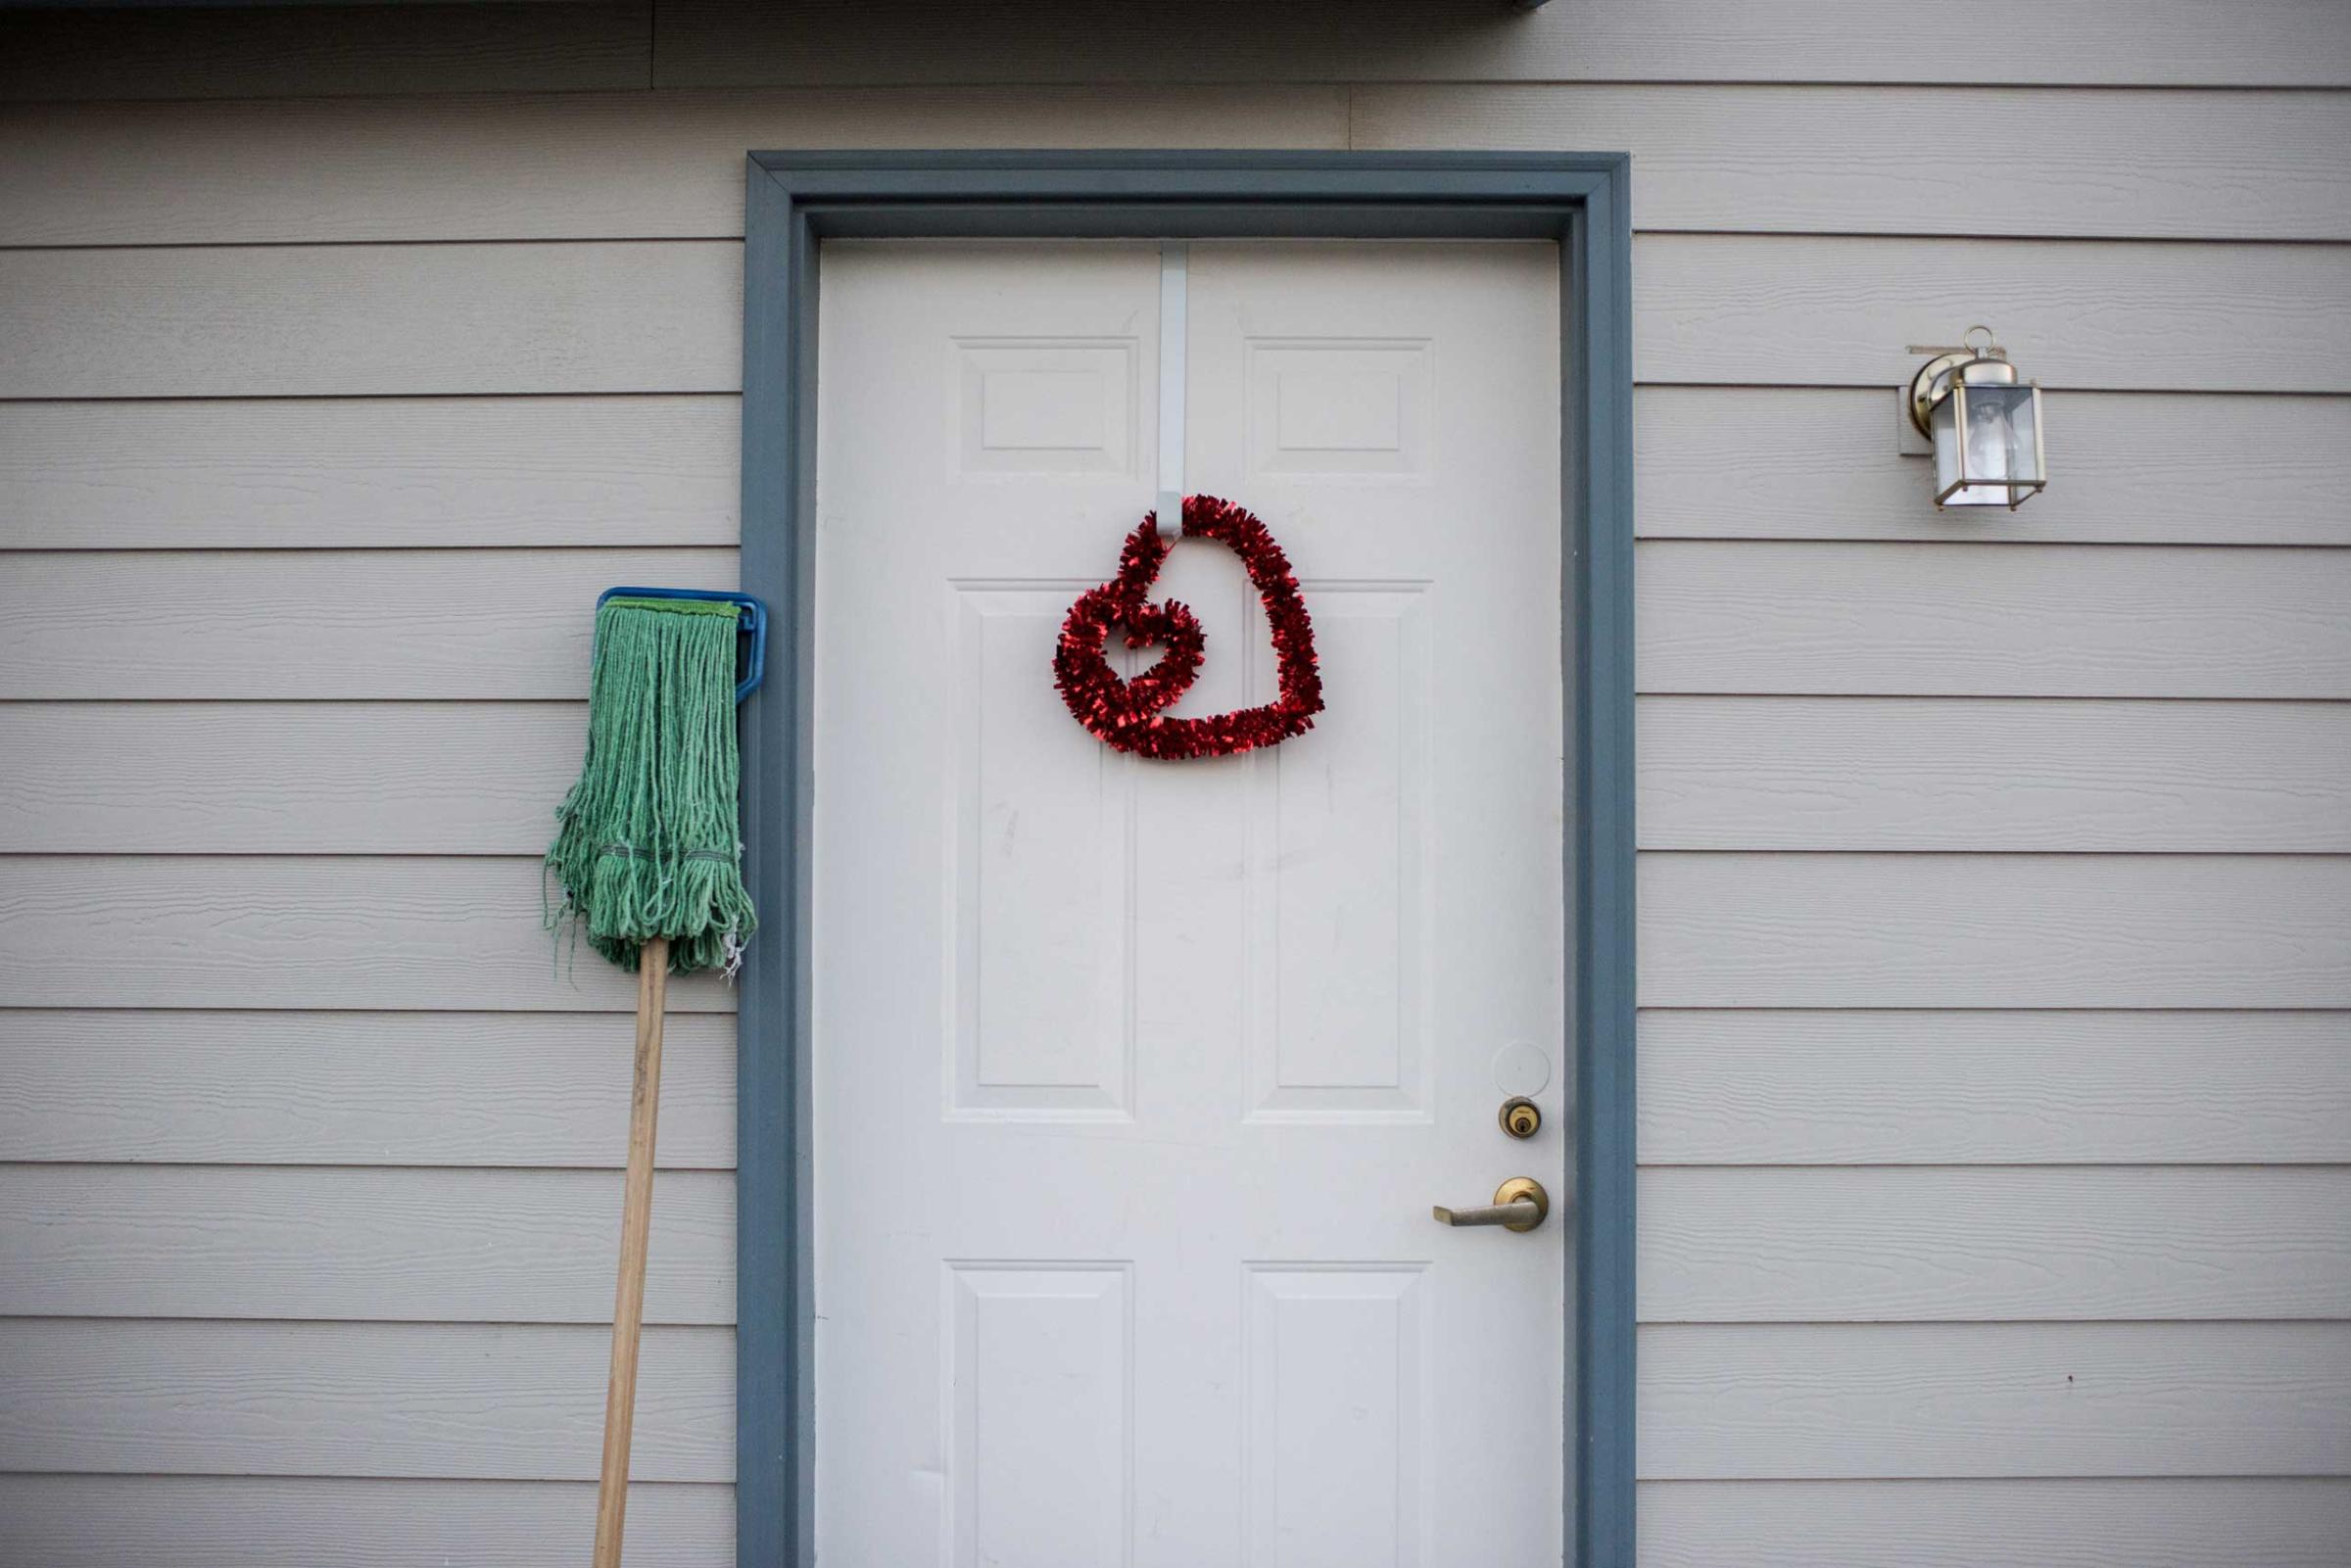 A heart shaped decoration hangs from the door of the house where Nathaniel resides.